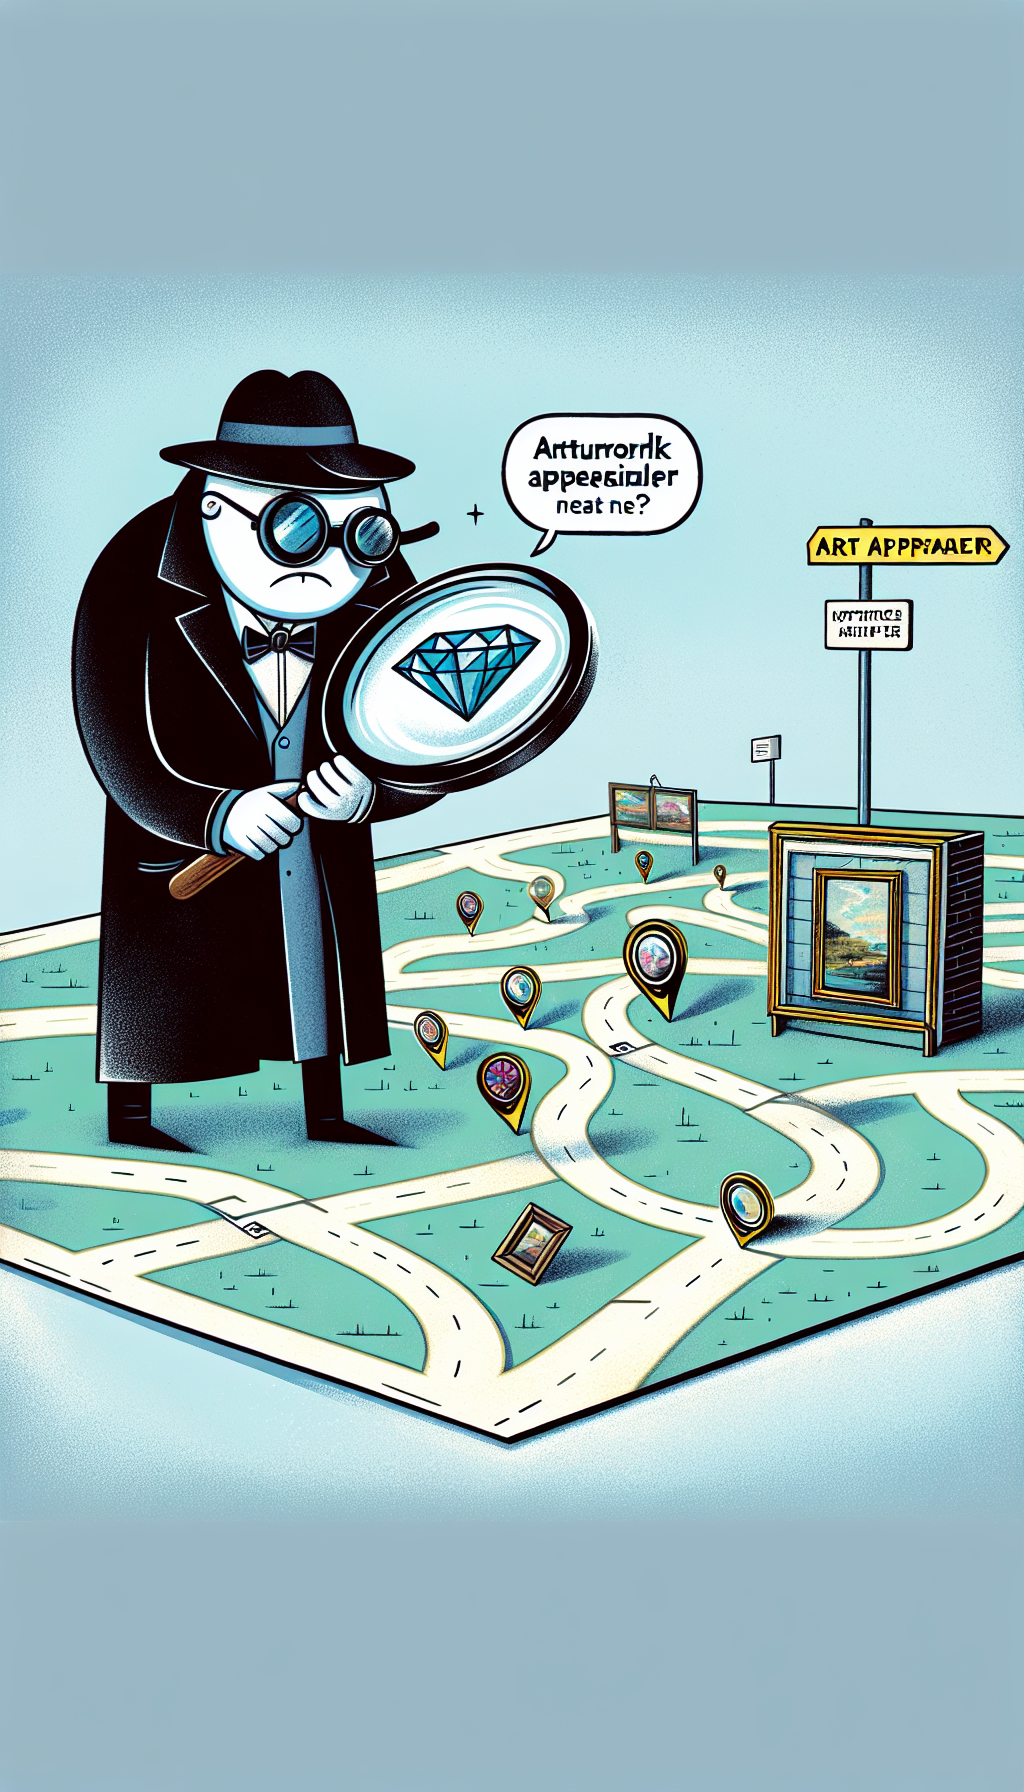 A whimsical map dotted with magnifying glasses, each focused on a hidden gem representing local art pieces, while a stylish Sherlock Holmes character with an appraiser's eye loupe admires a painting nearby, a speech bubble with "Artwork Appraisal Near Me?" above. The map trails lead to a storefront labeled "Reputable Art Appraiser".